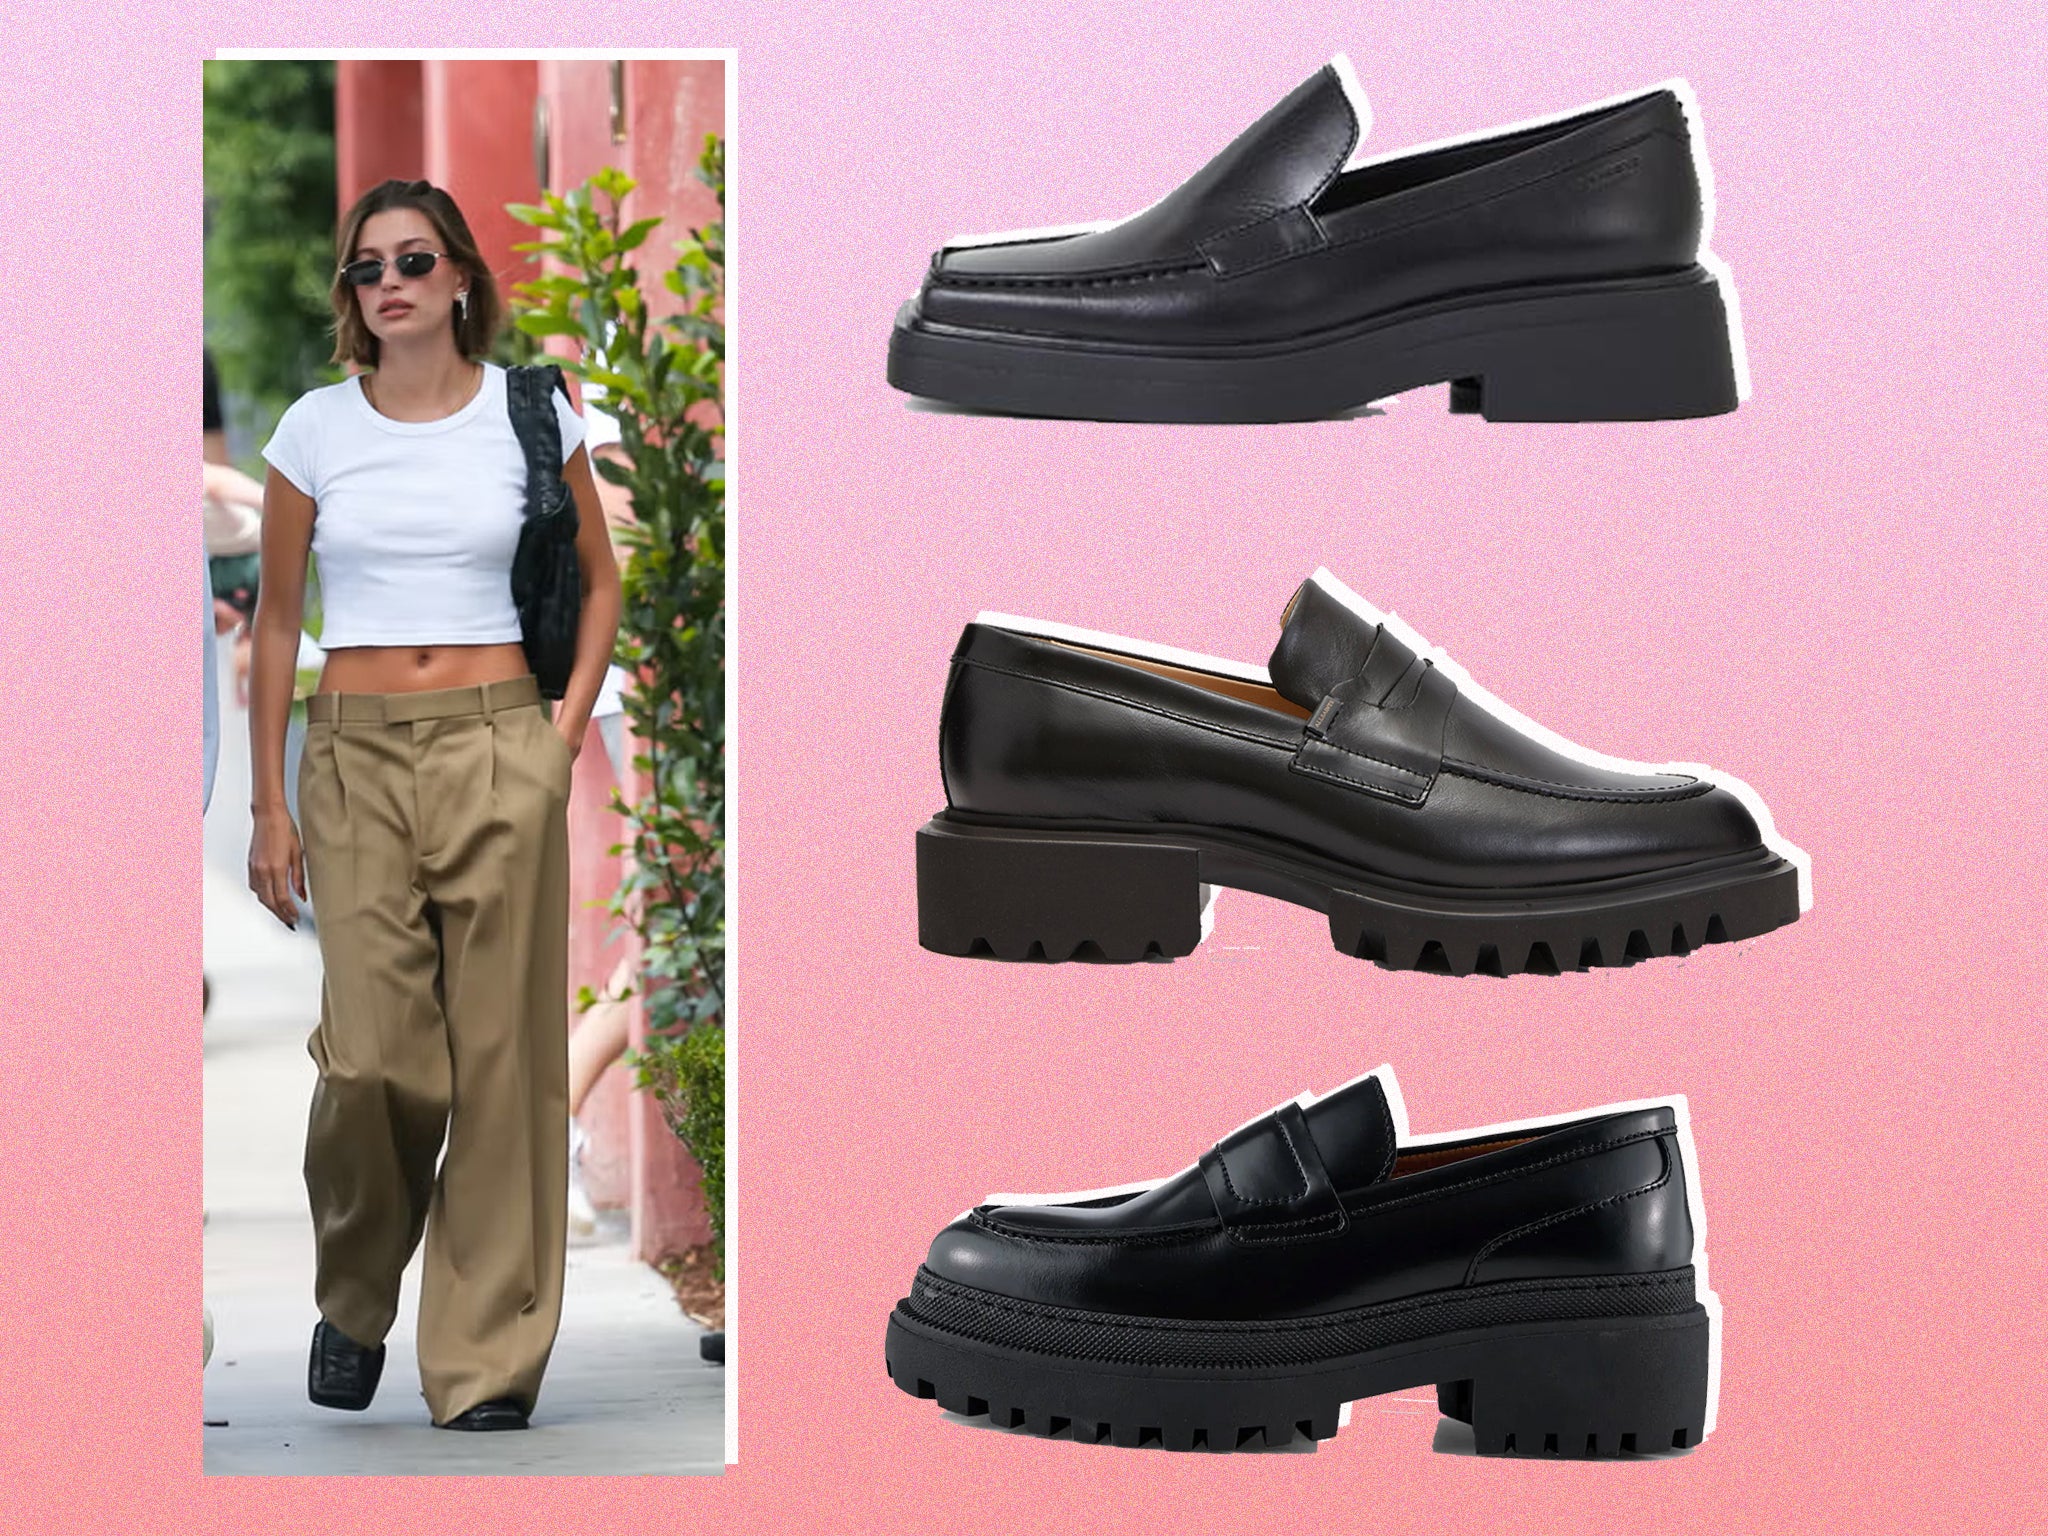 Hailey Bieber has made the case for comfortable, versatile flat shoes